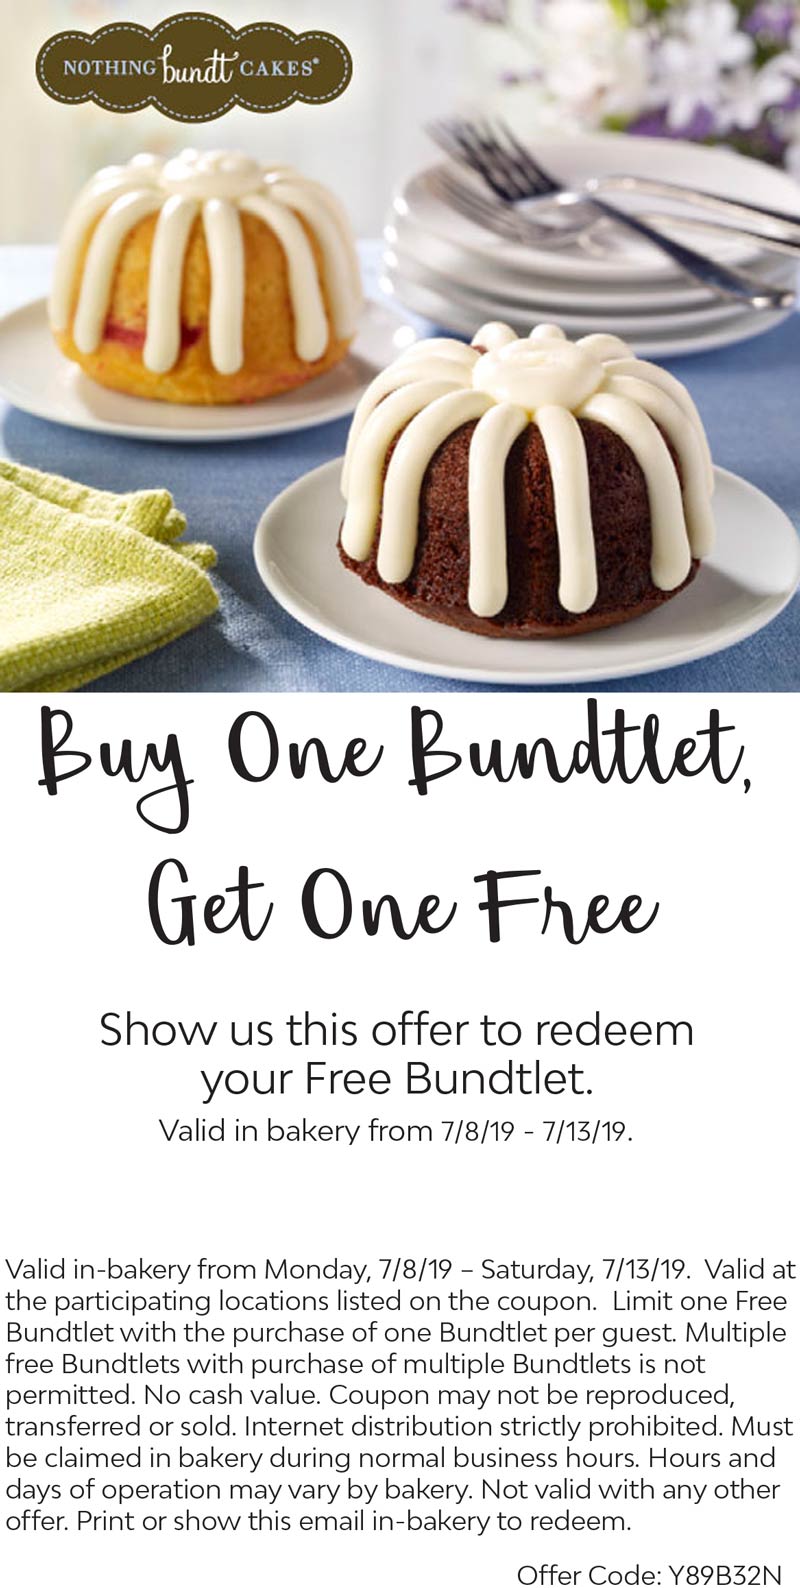 Nothing Bundt Cakes July 2021 Coupons and Promo Codes ð